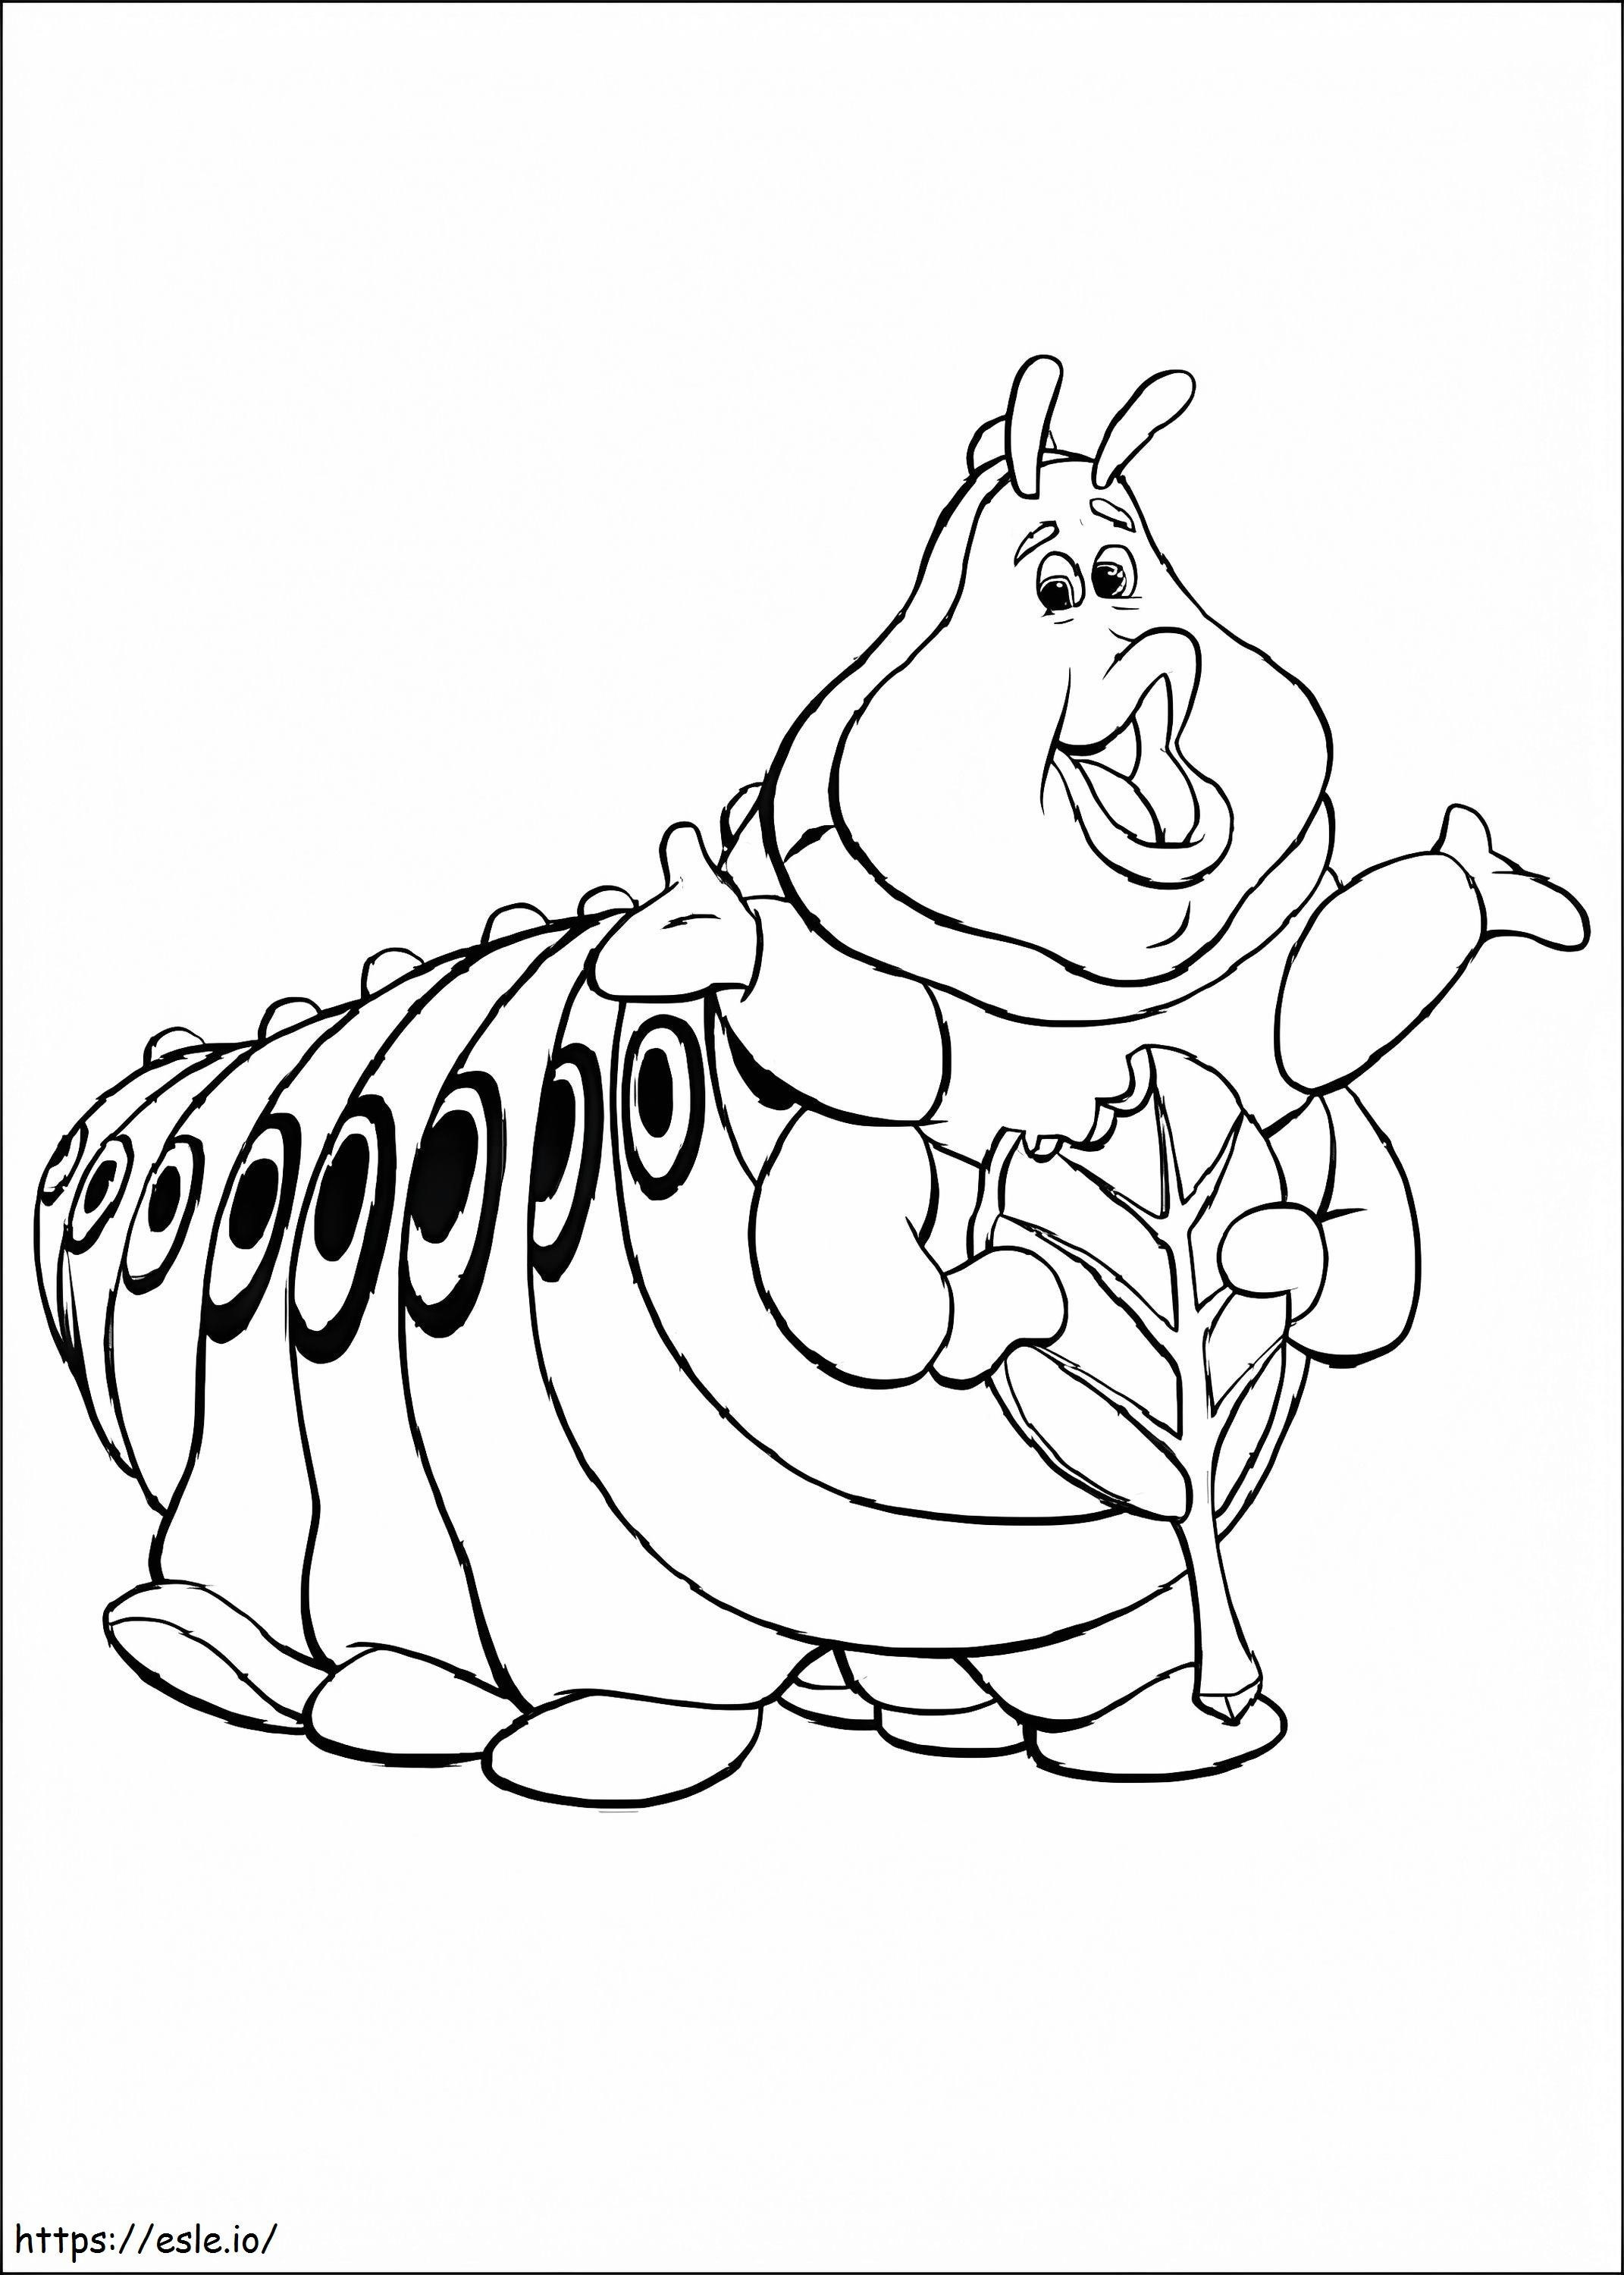 1599810121 Caterpillar coloring page